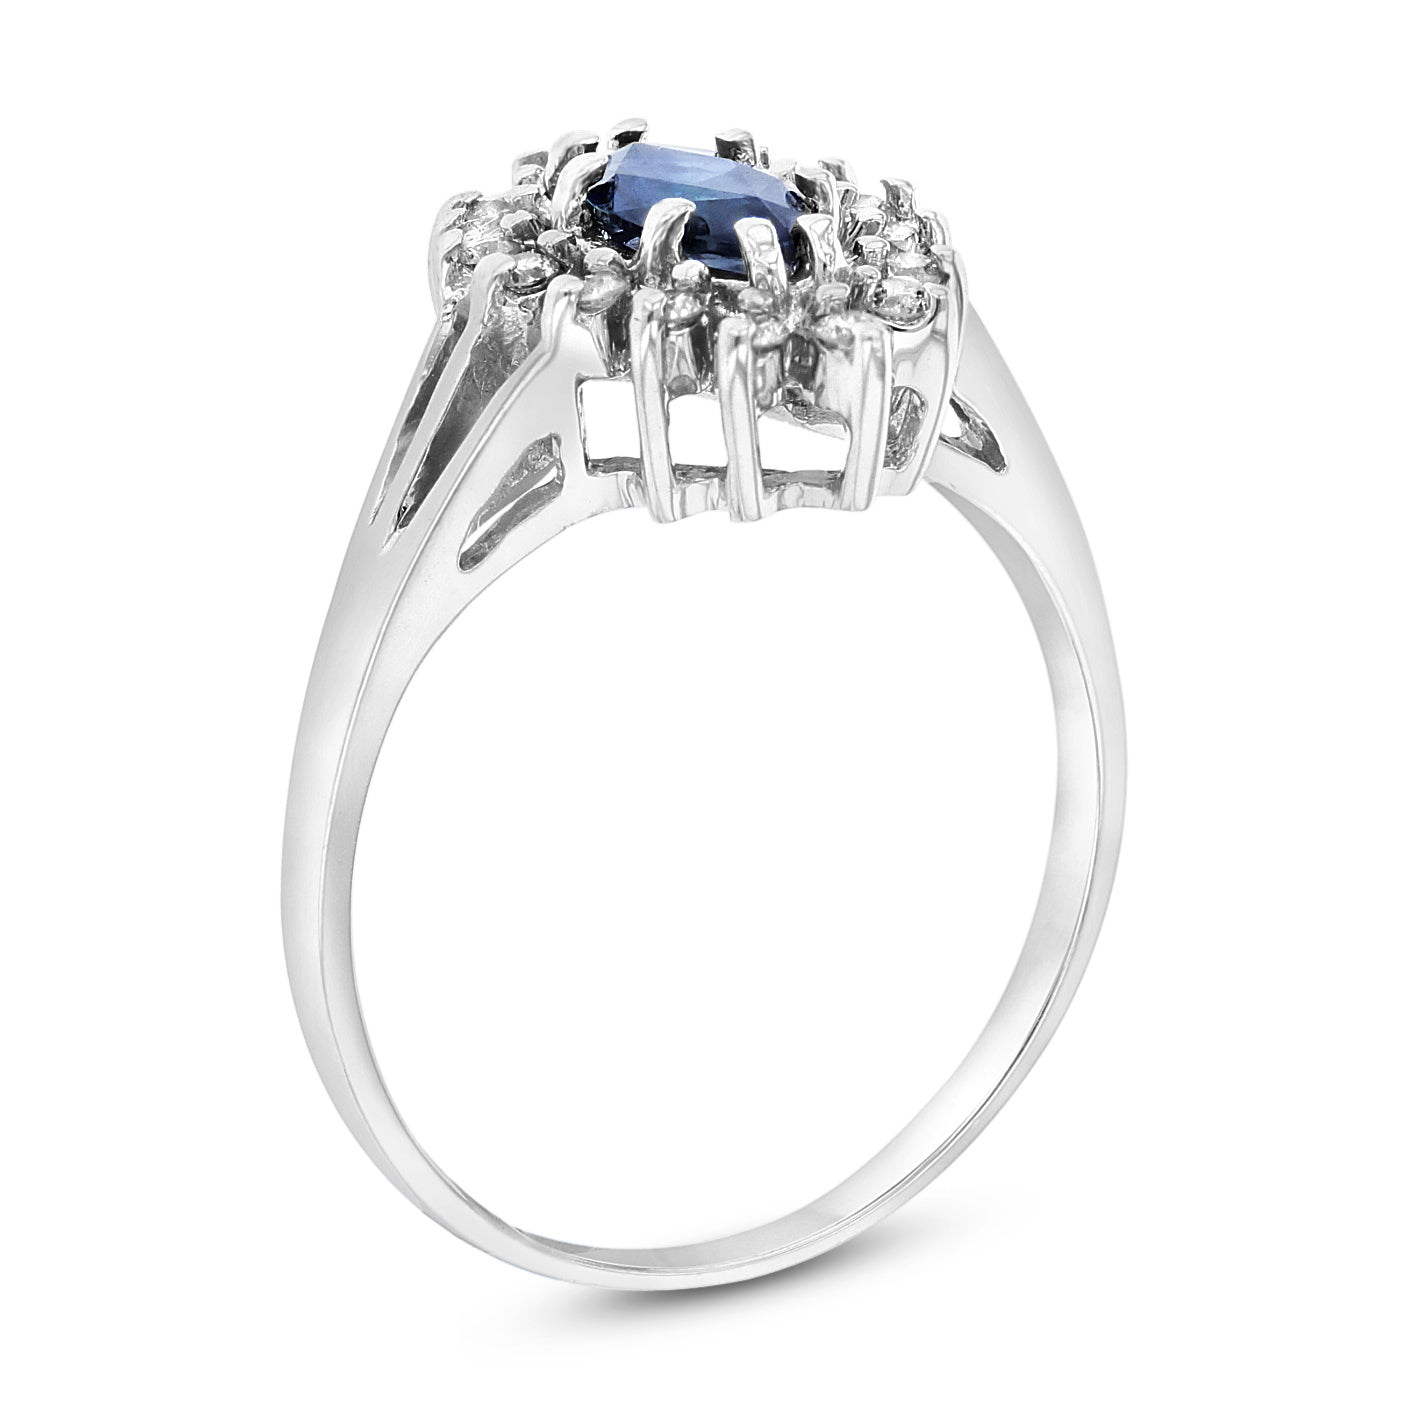 1.0ct Marquise-Cut Blue Sapphire & Diamond Halo Ring in 14k White Gold